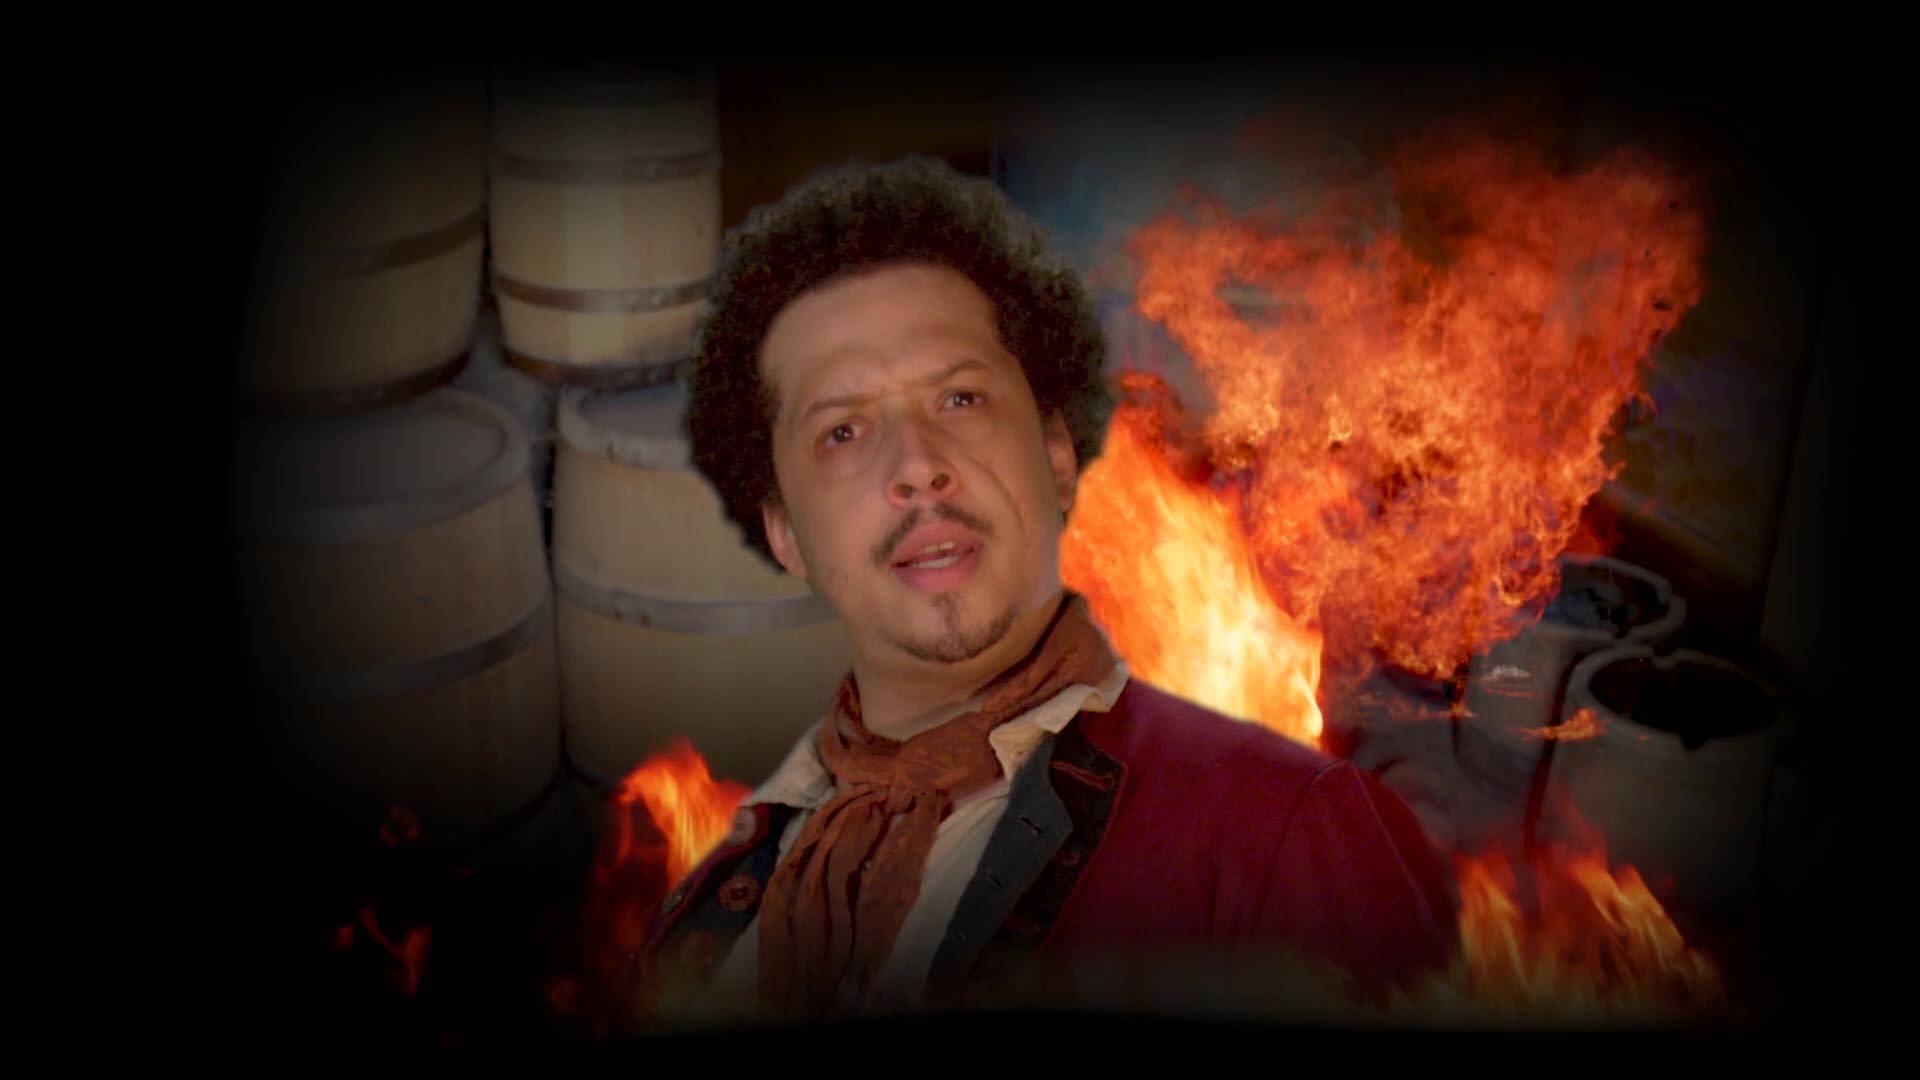 Pirate actor in front of fiery scene